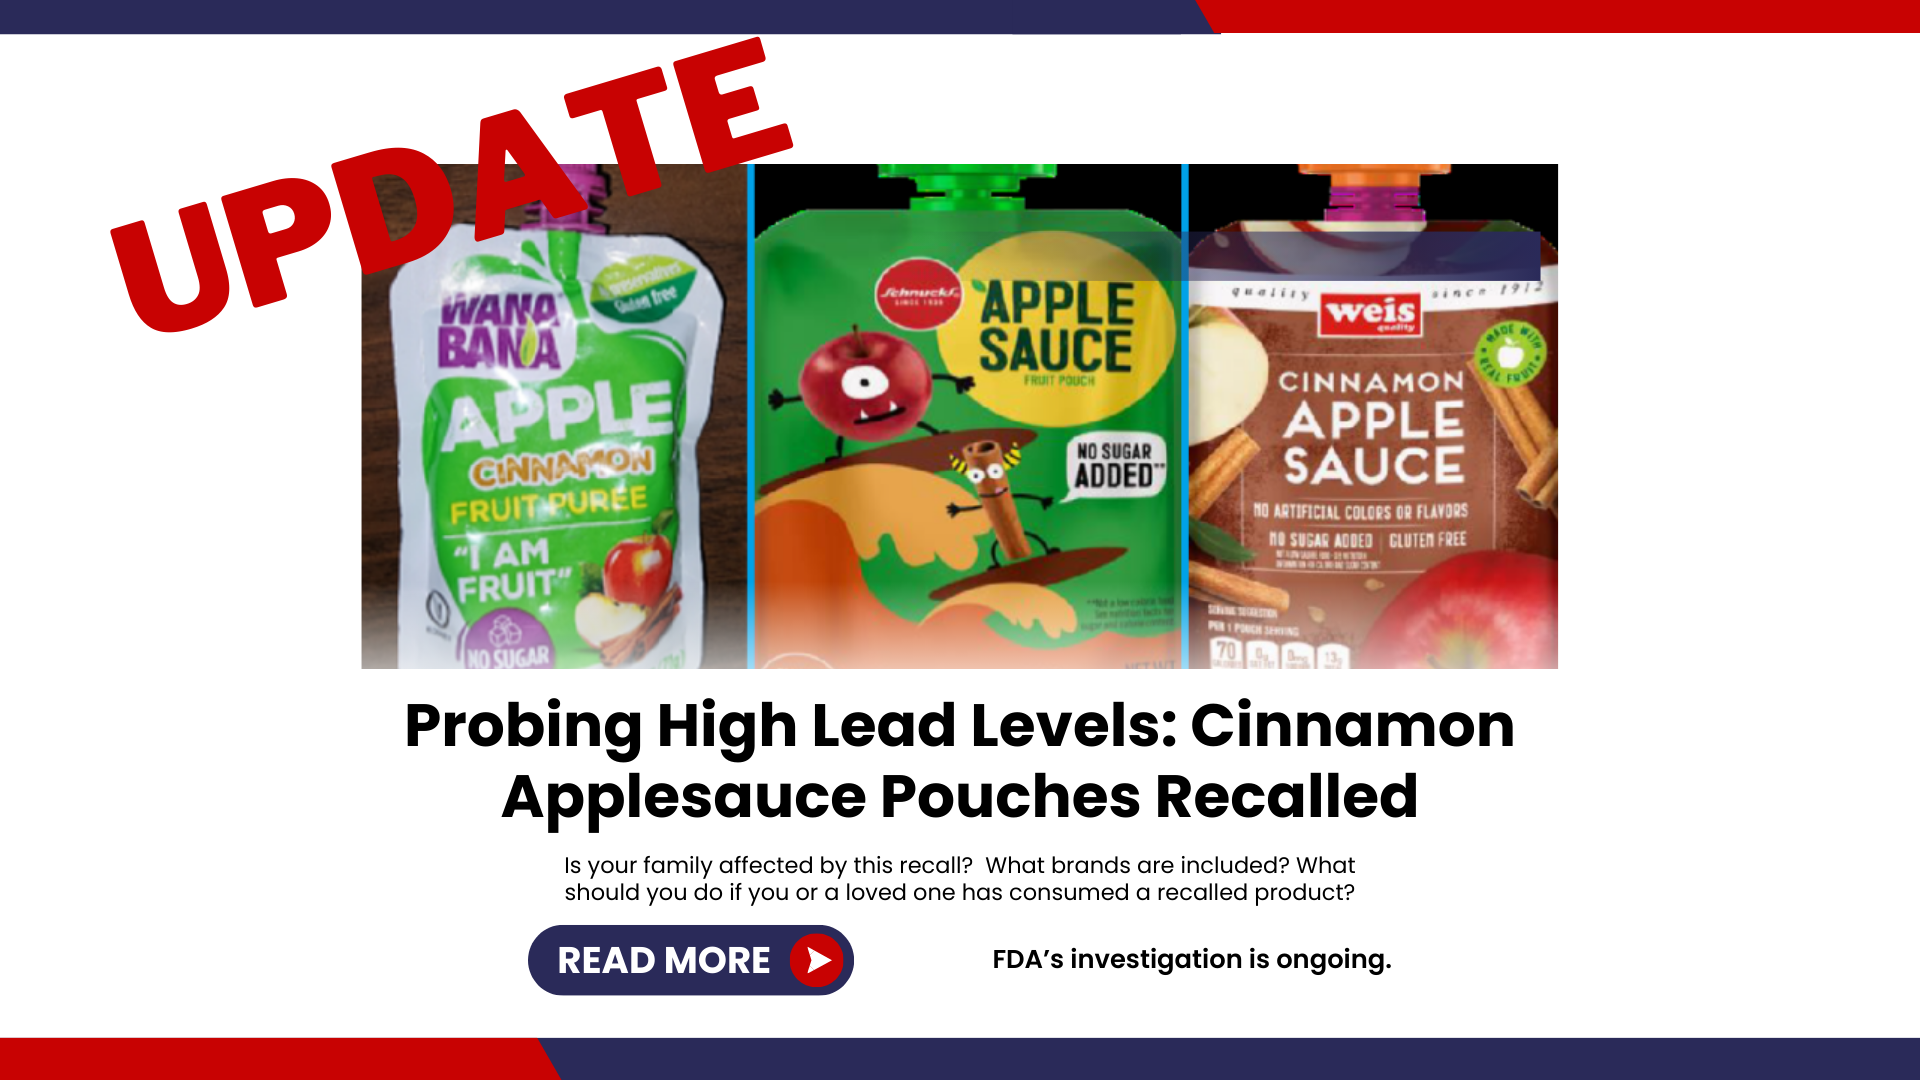 UPDATE! Applesauce Product Recall: Protecting Your Loved Ones